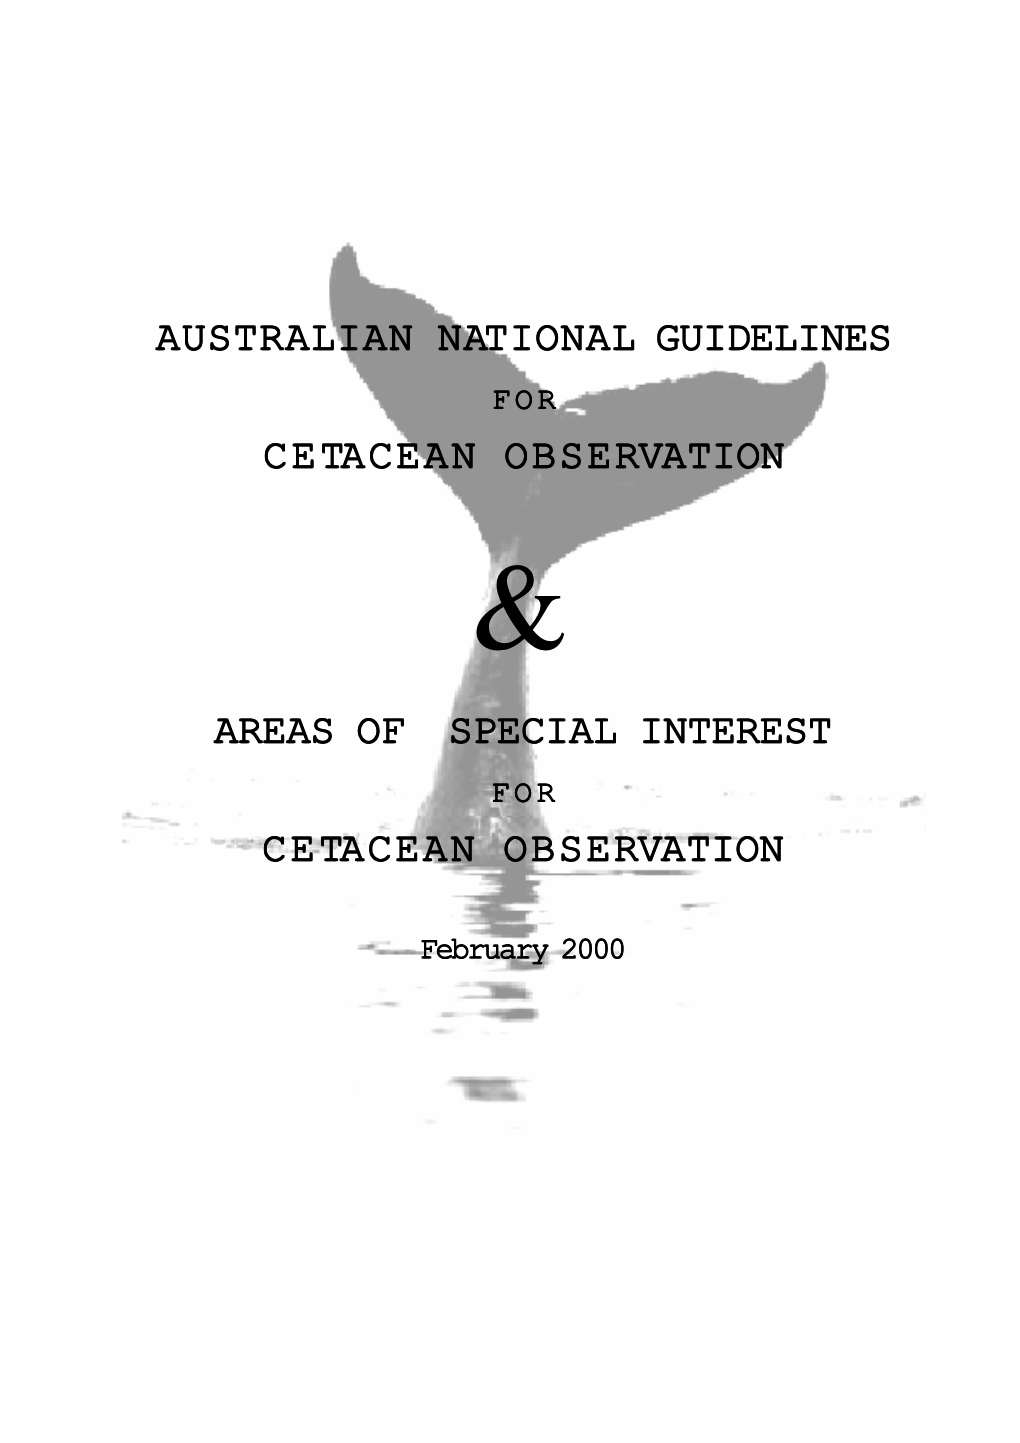 Australian National Guidelines for Cetacean Observation and Areas of Special Interest for Ceatacean Observation